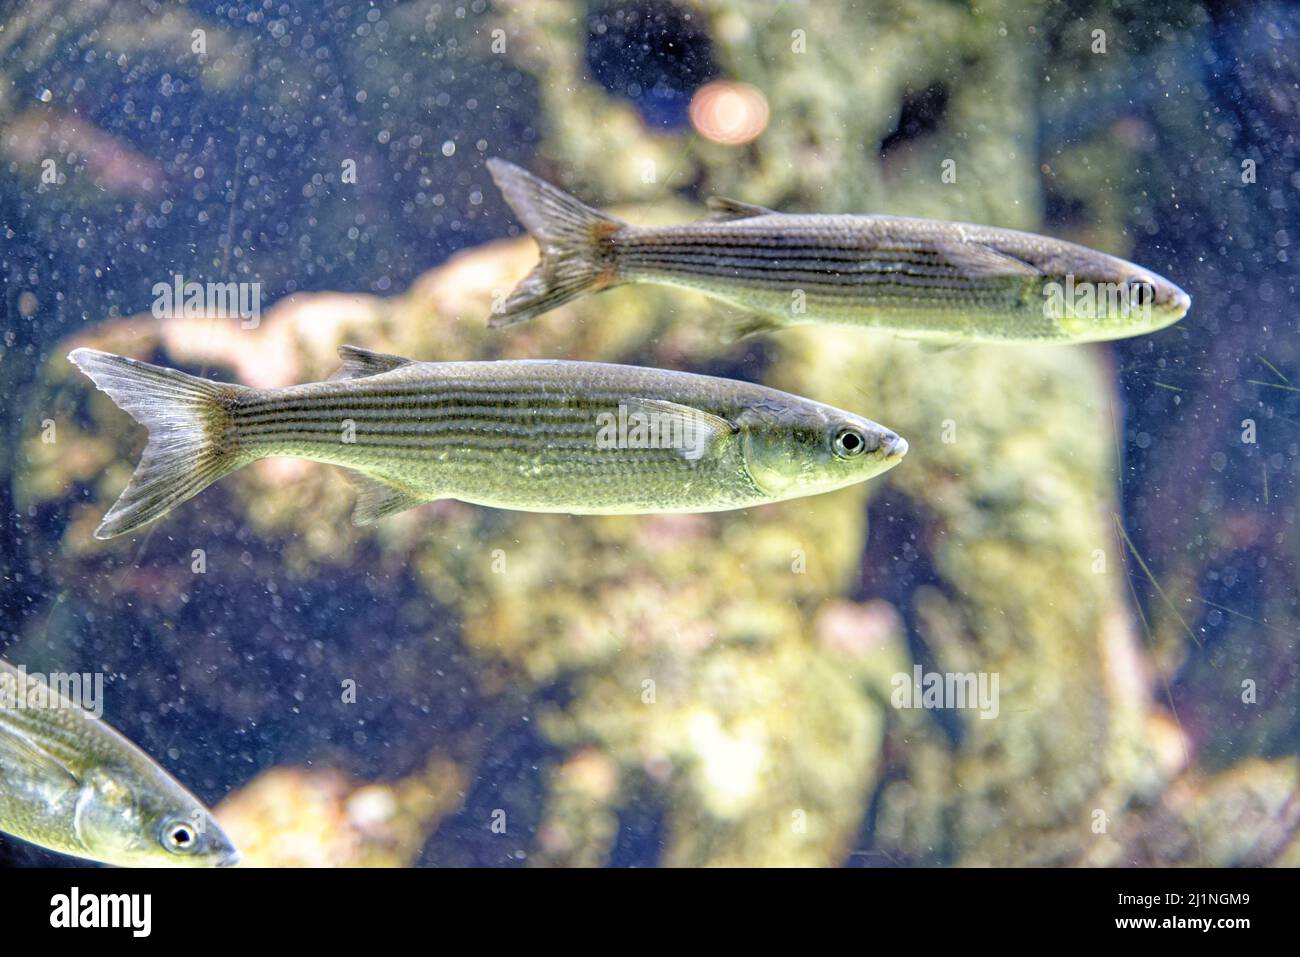 The leaping mullet (Chelon saliens) is a species of fish in the family Mugilidae. It is found in coastal waters and estuaries in the northeast Atlanti Stock Photo